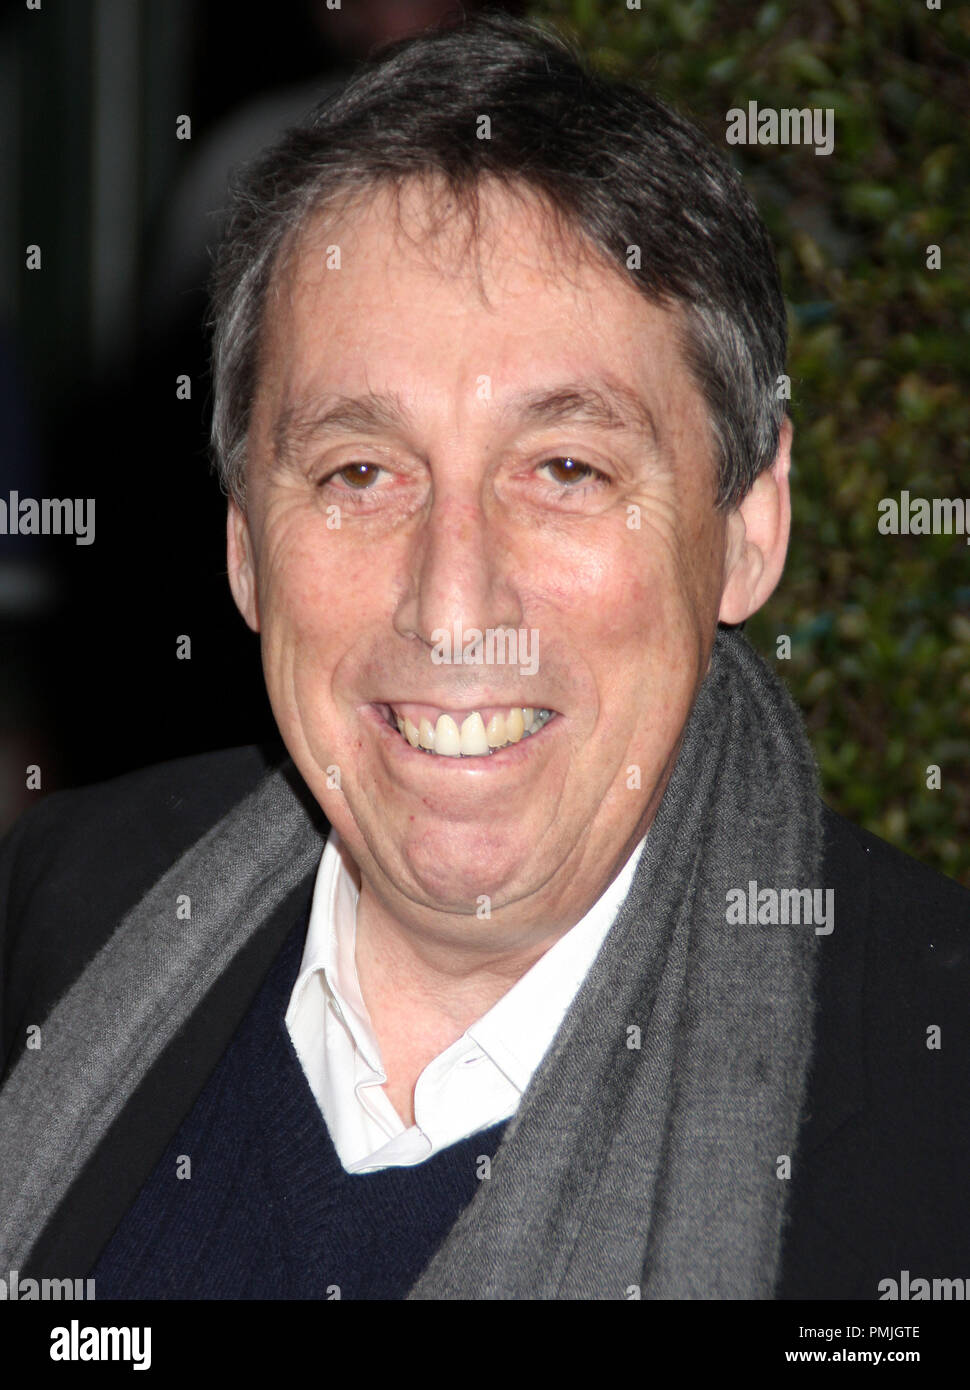 Ivan Reitman at the Los Angeles Premiere of NO STRINGS ATTACHED held at the Regency Village Theatre in Los Angeles, CA on Tuesday, January 11, 2011. Photo by Pedro Ulayan Pacific Rim Photo Press / PictureLux Stock Photo